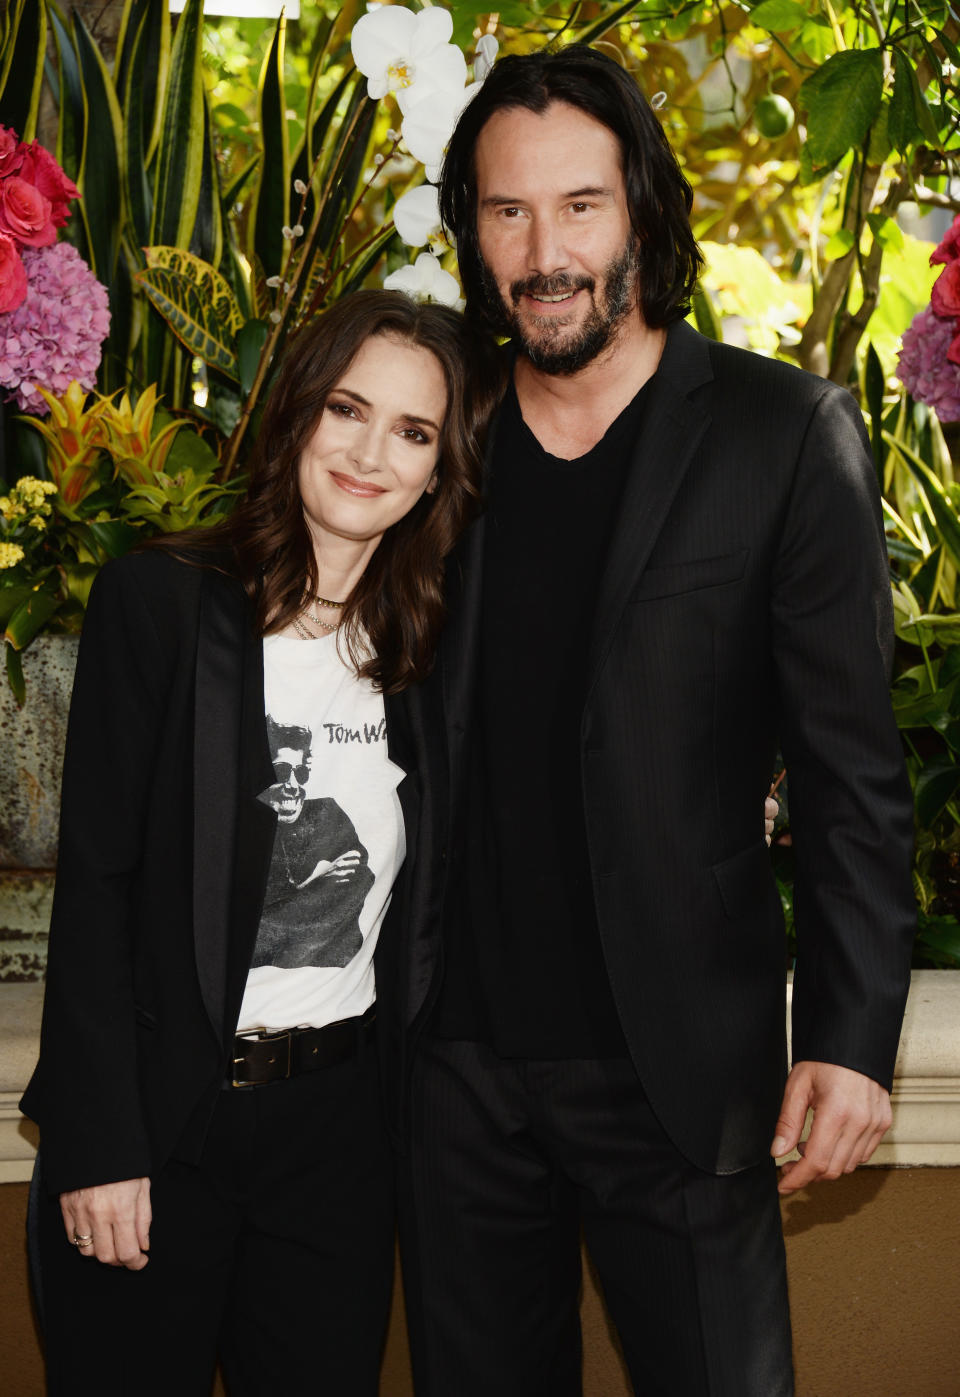 Winona Ryder has opened up with the bombshell that she and Keanu Reeves may have actually been married for 25 years. Source: Getty